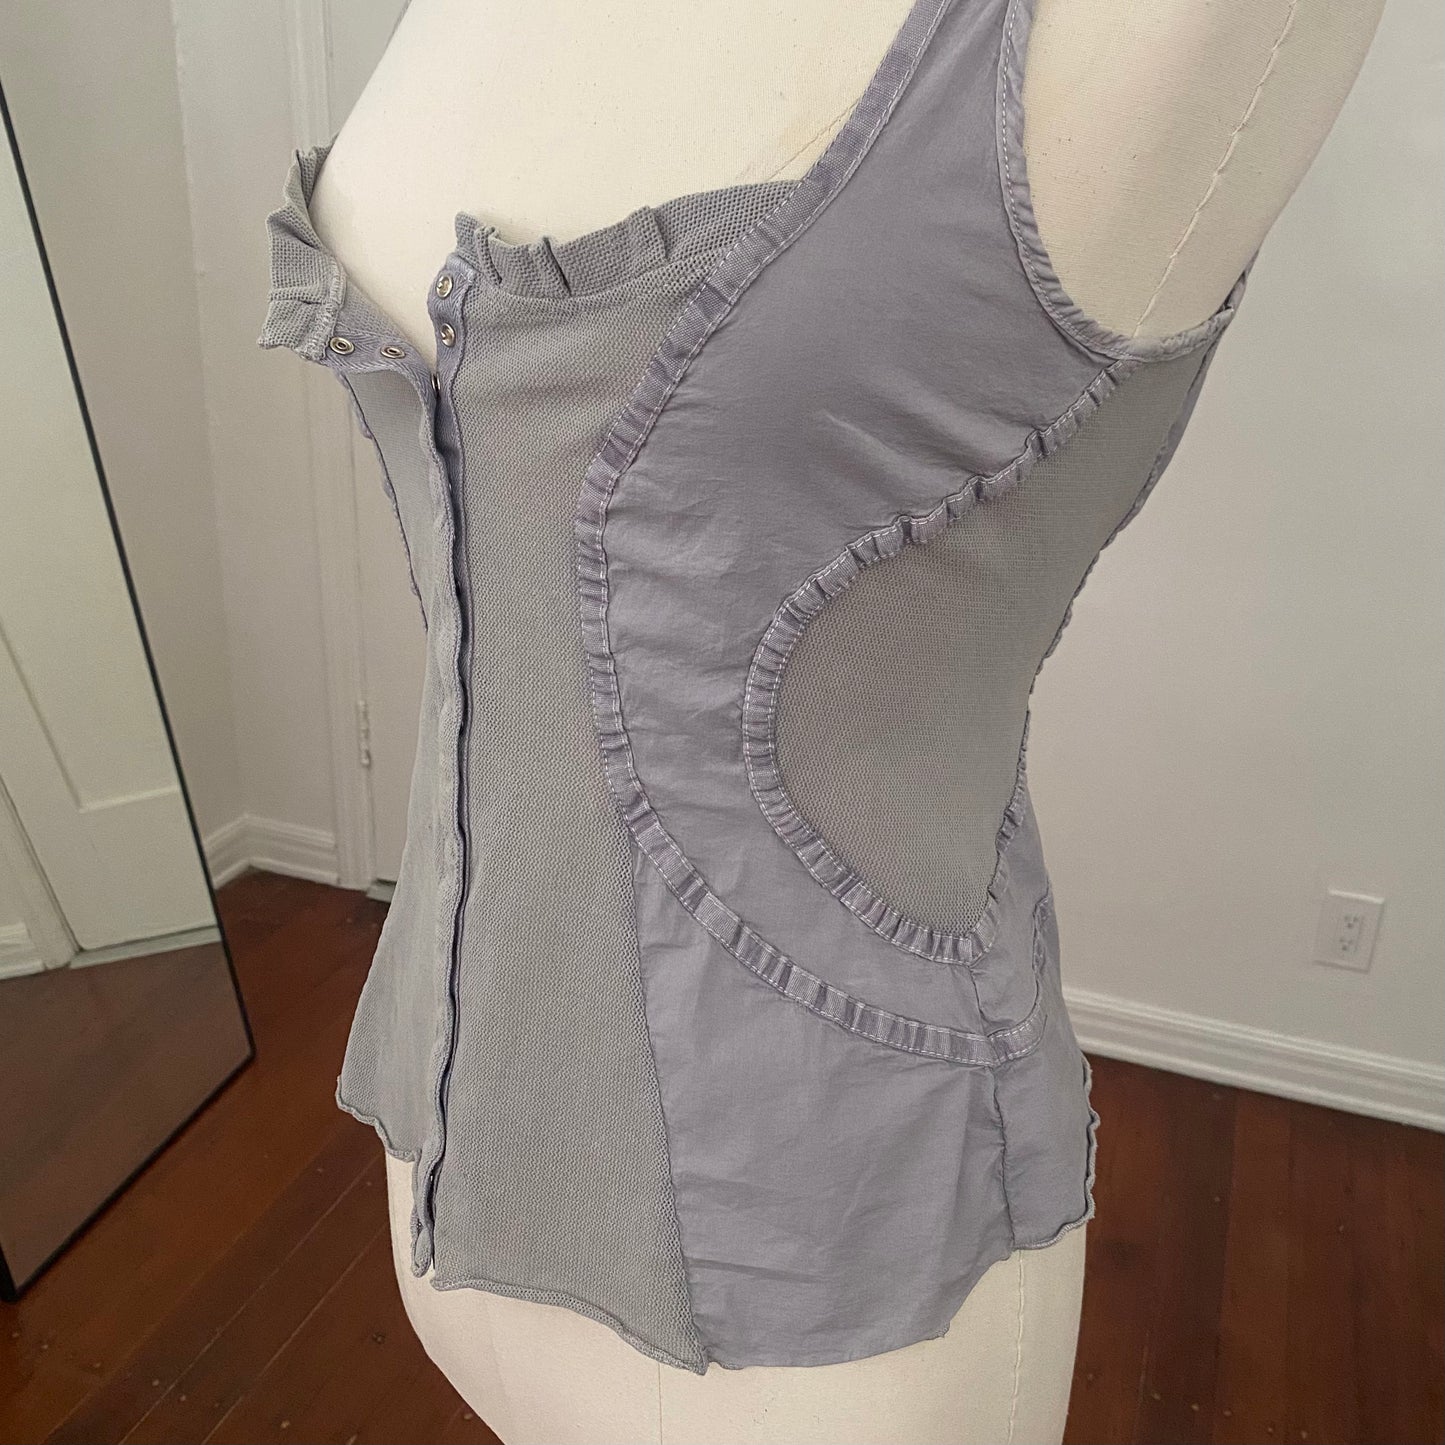 french vintage corset style top